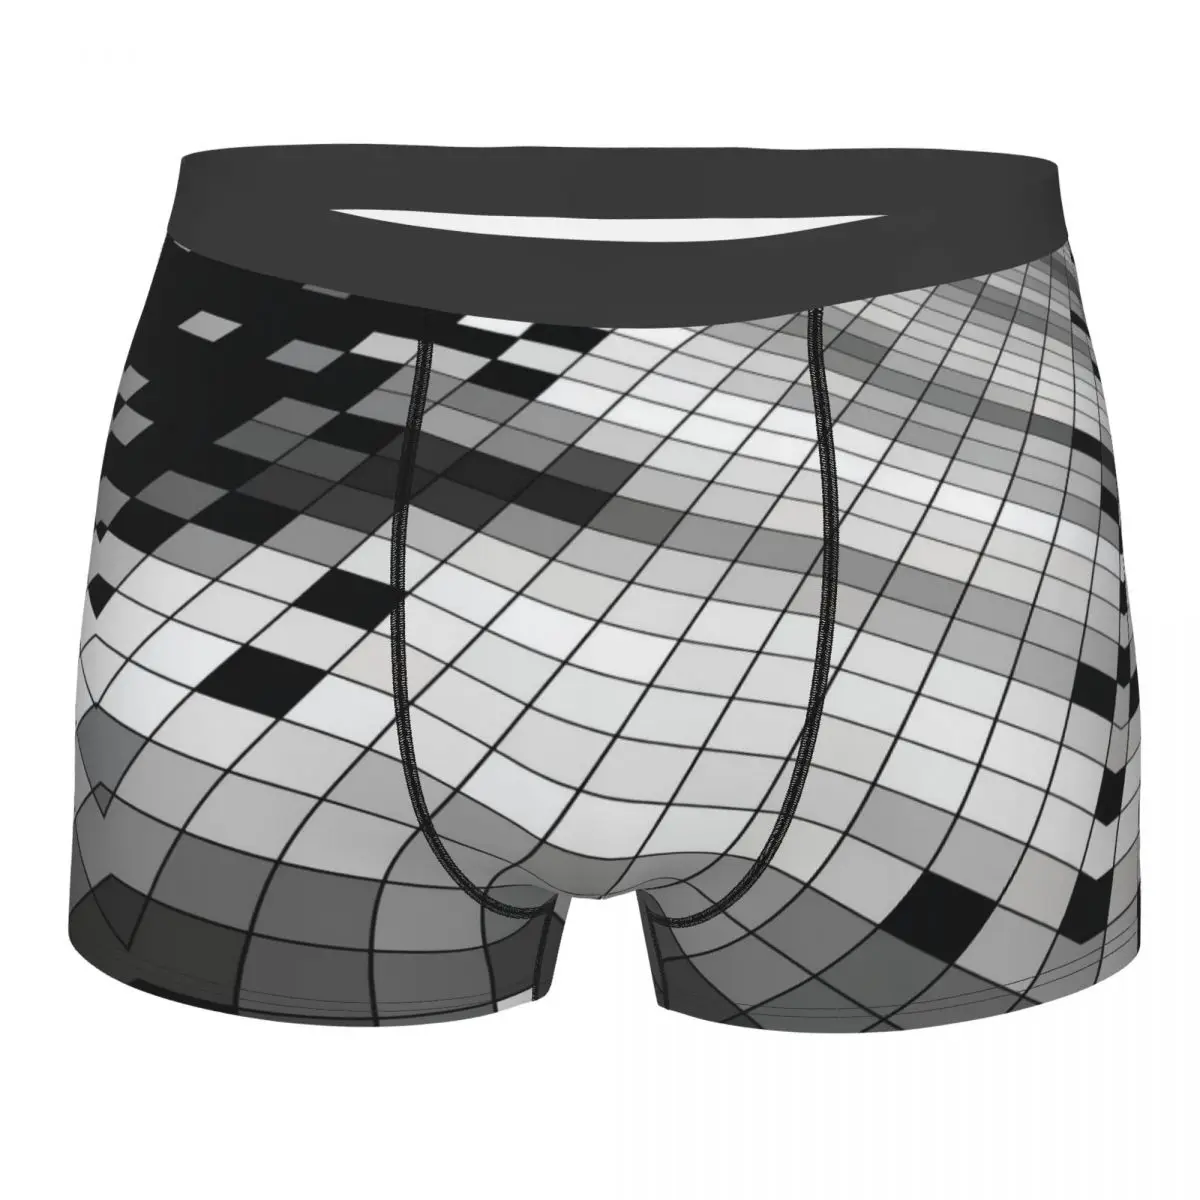 Black And White 3D Grid Men Boxer Briefs Underwear Highly Breathable Top Quality Gift Idea